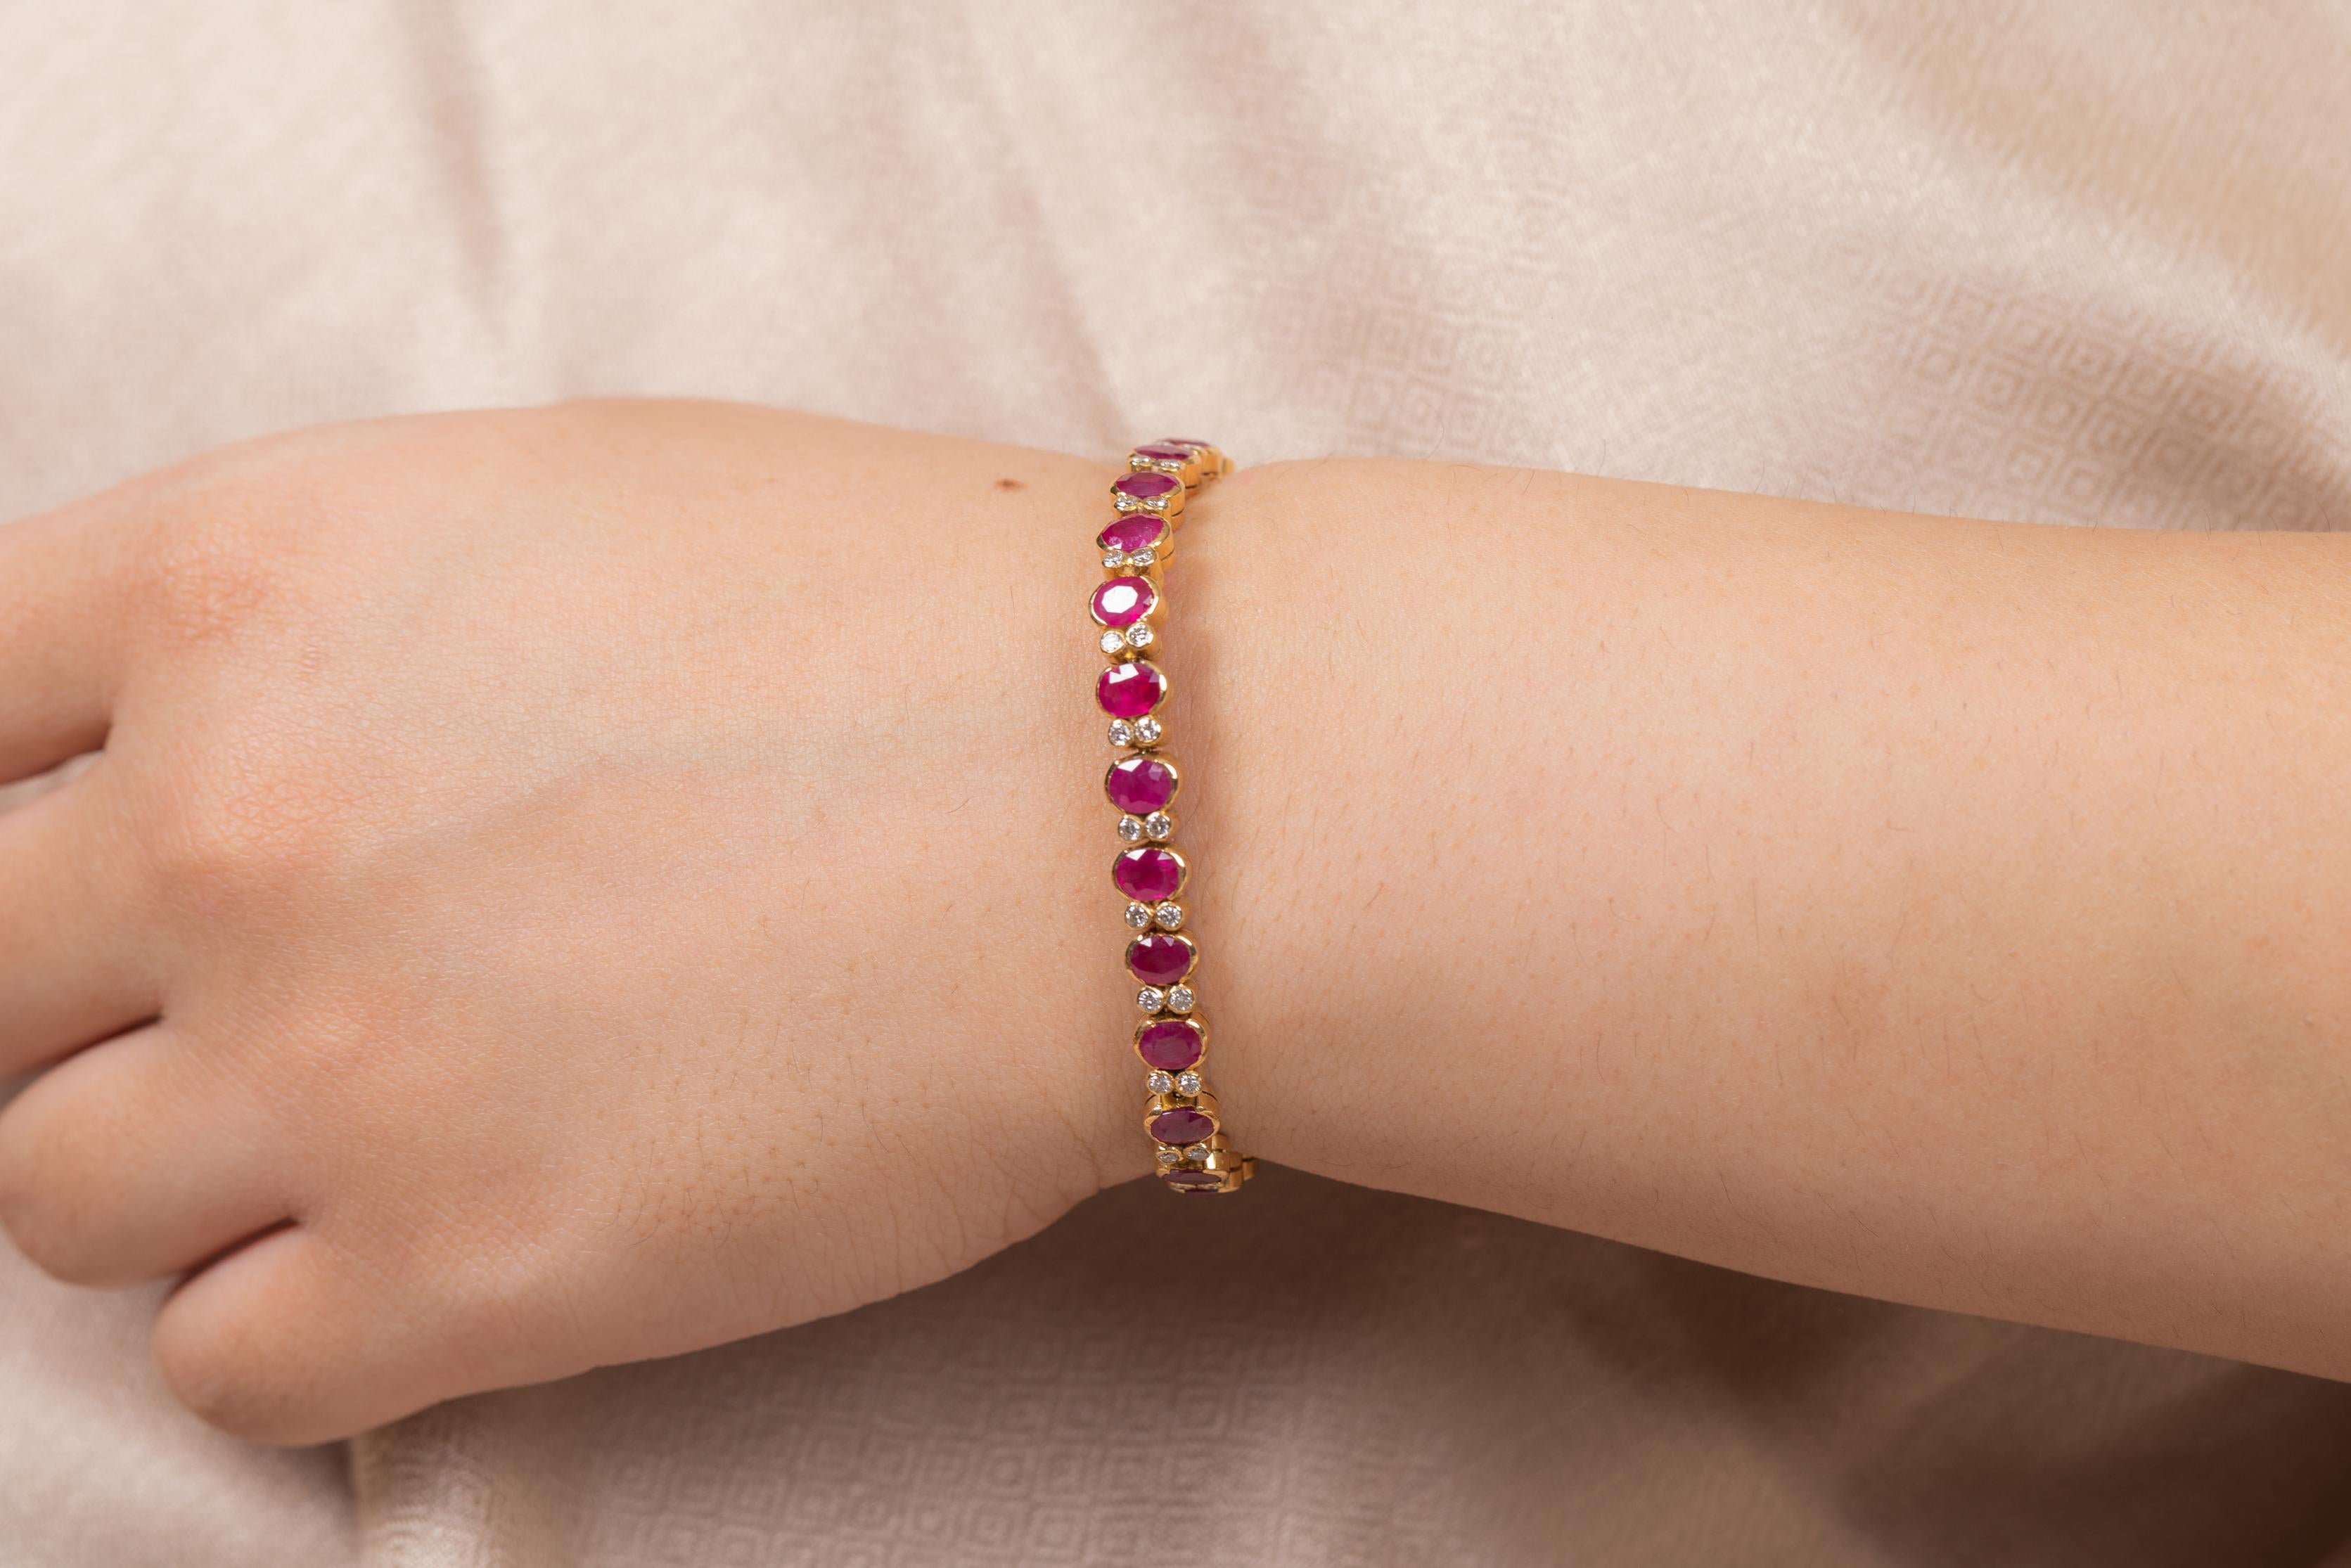 Bracelets are worn to enhance the look. Women love to look good. It is common to see a woman rocking a lovely gold bracelet on her wrist. A gold gemstone bracelet is the ultimate statement piece for every stylish woman.

A tennis bracelet is an